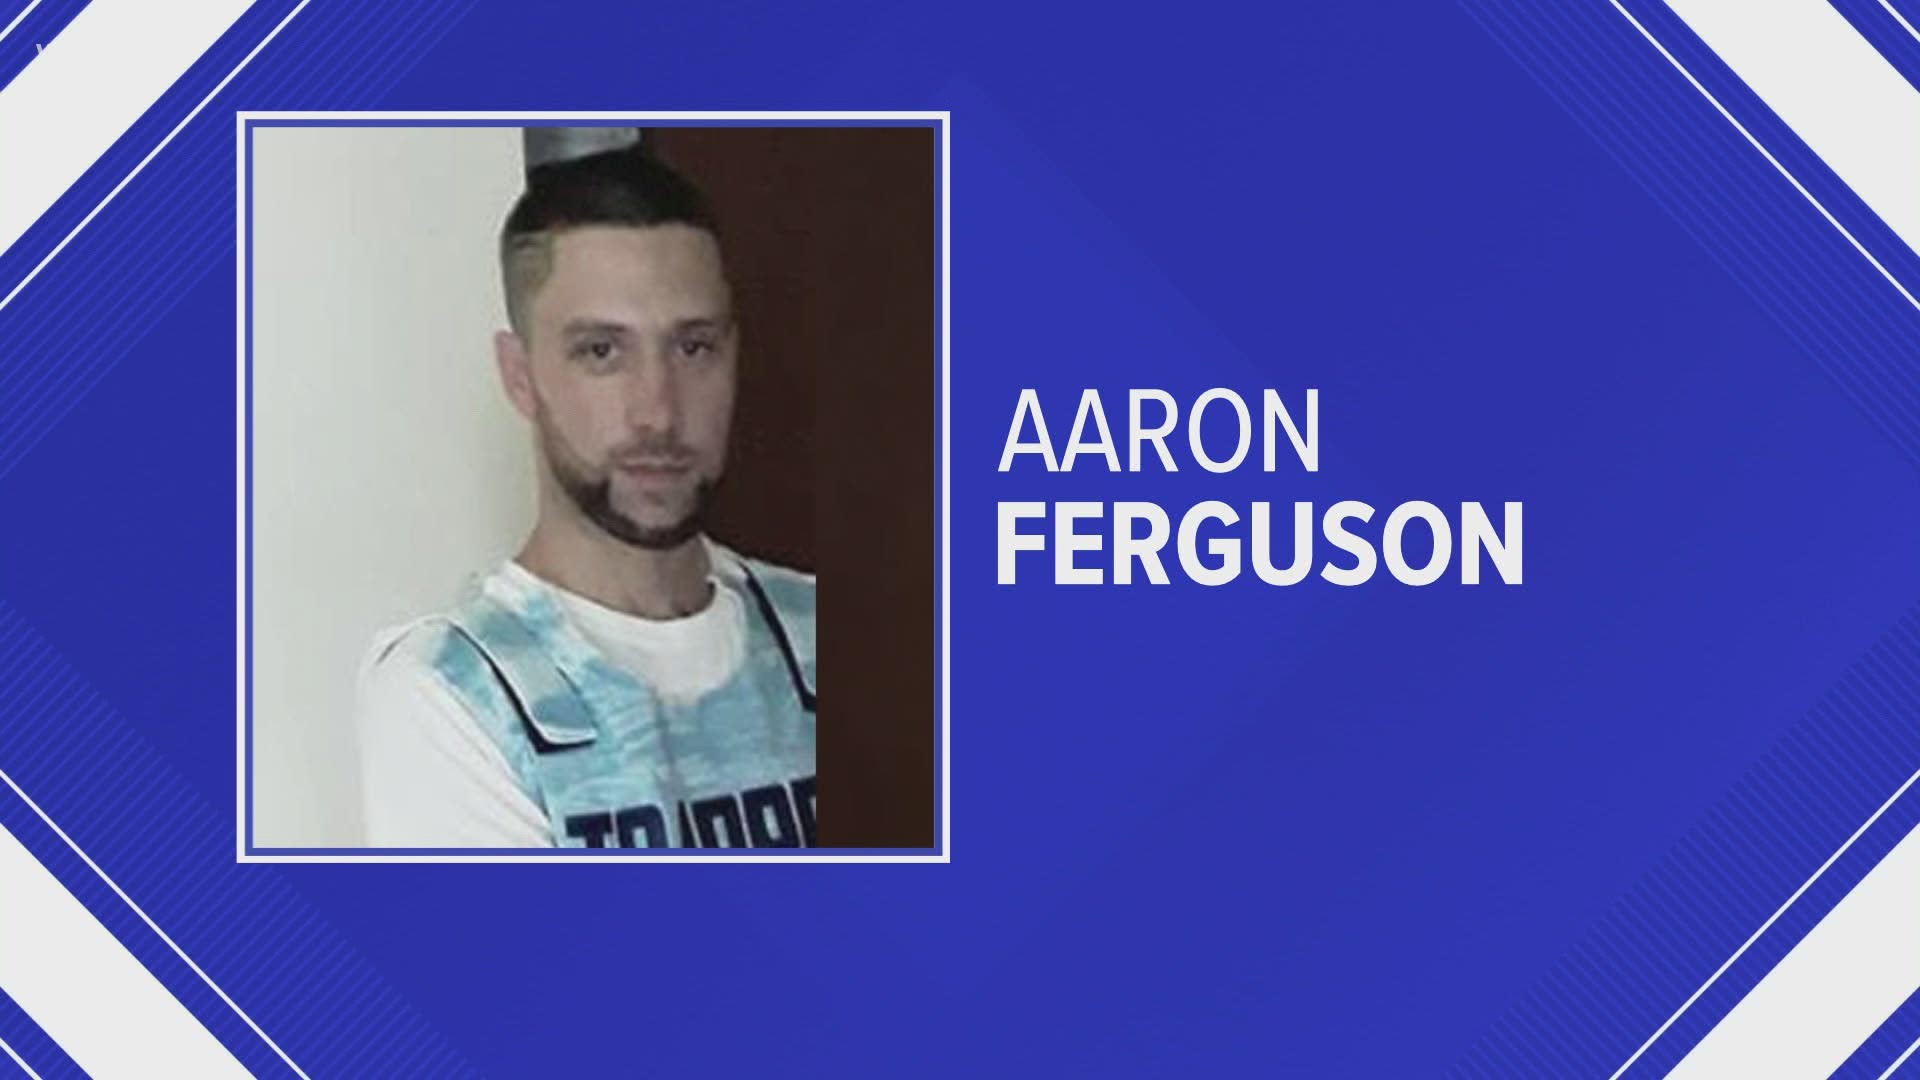 Aaron Furguson was booked into the Lucas County Jail on Friday.